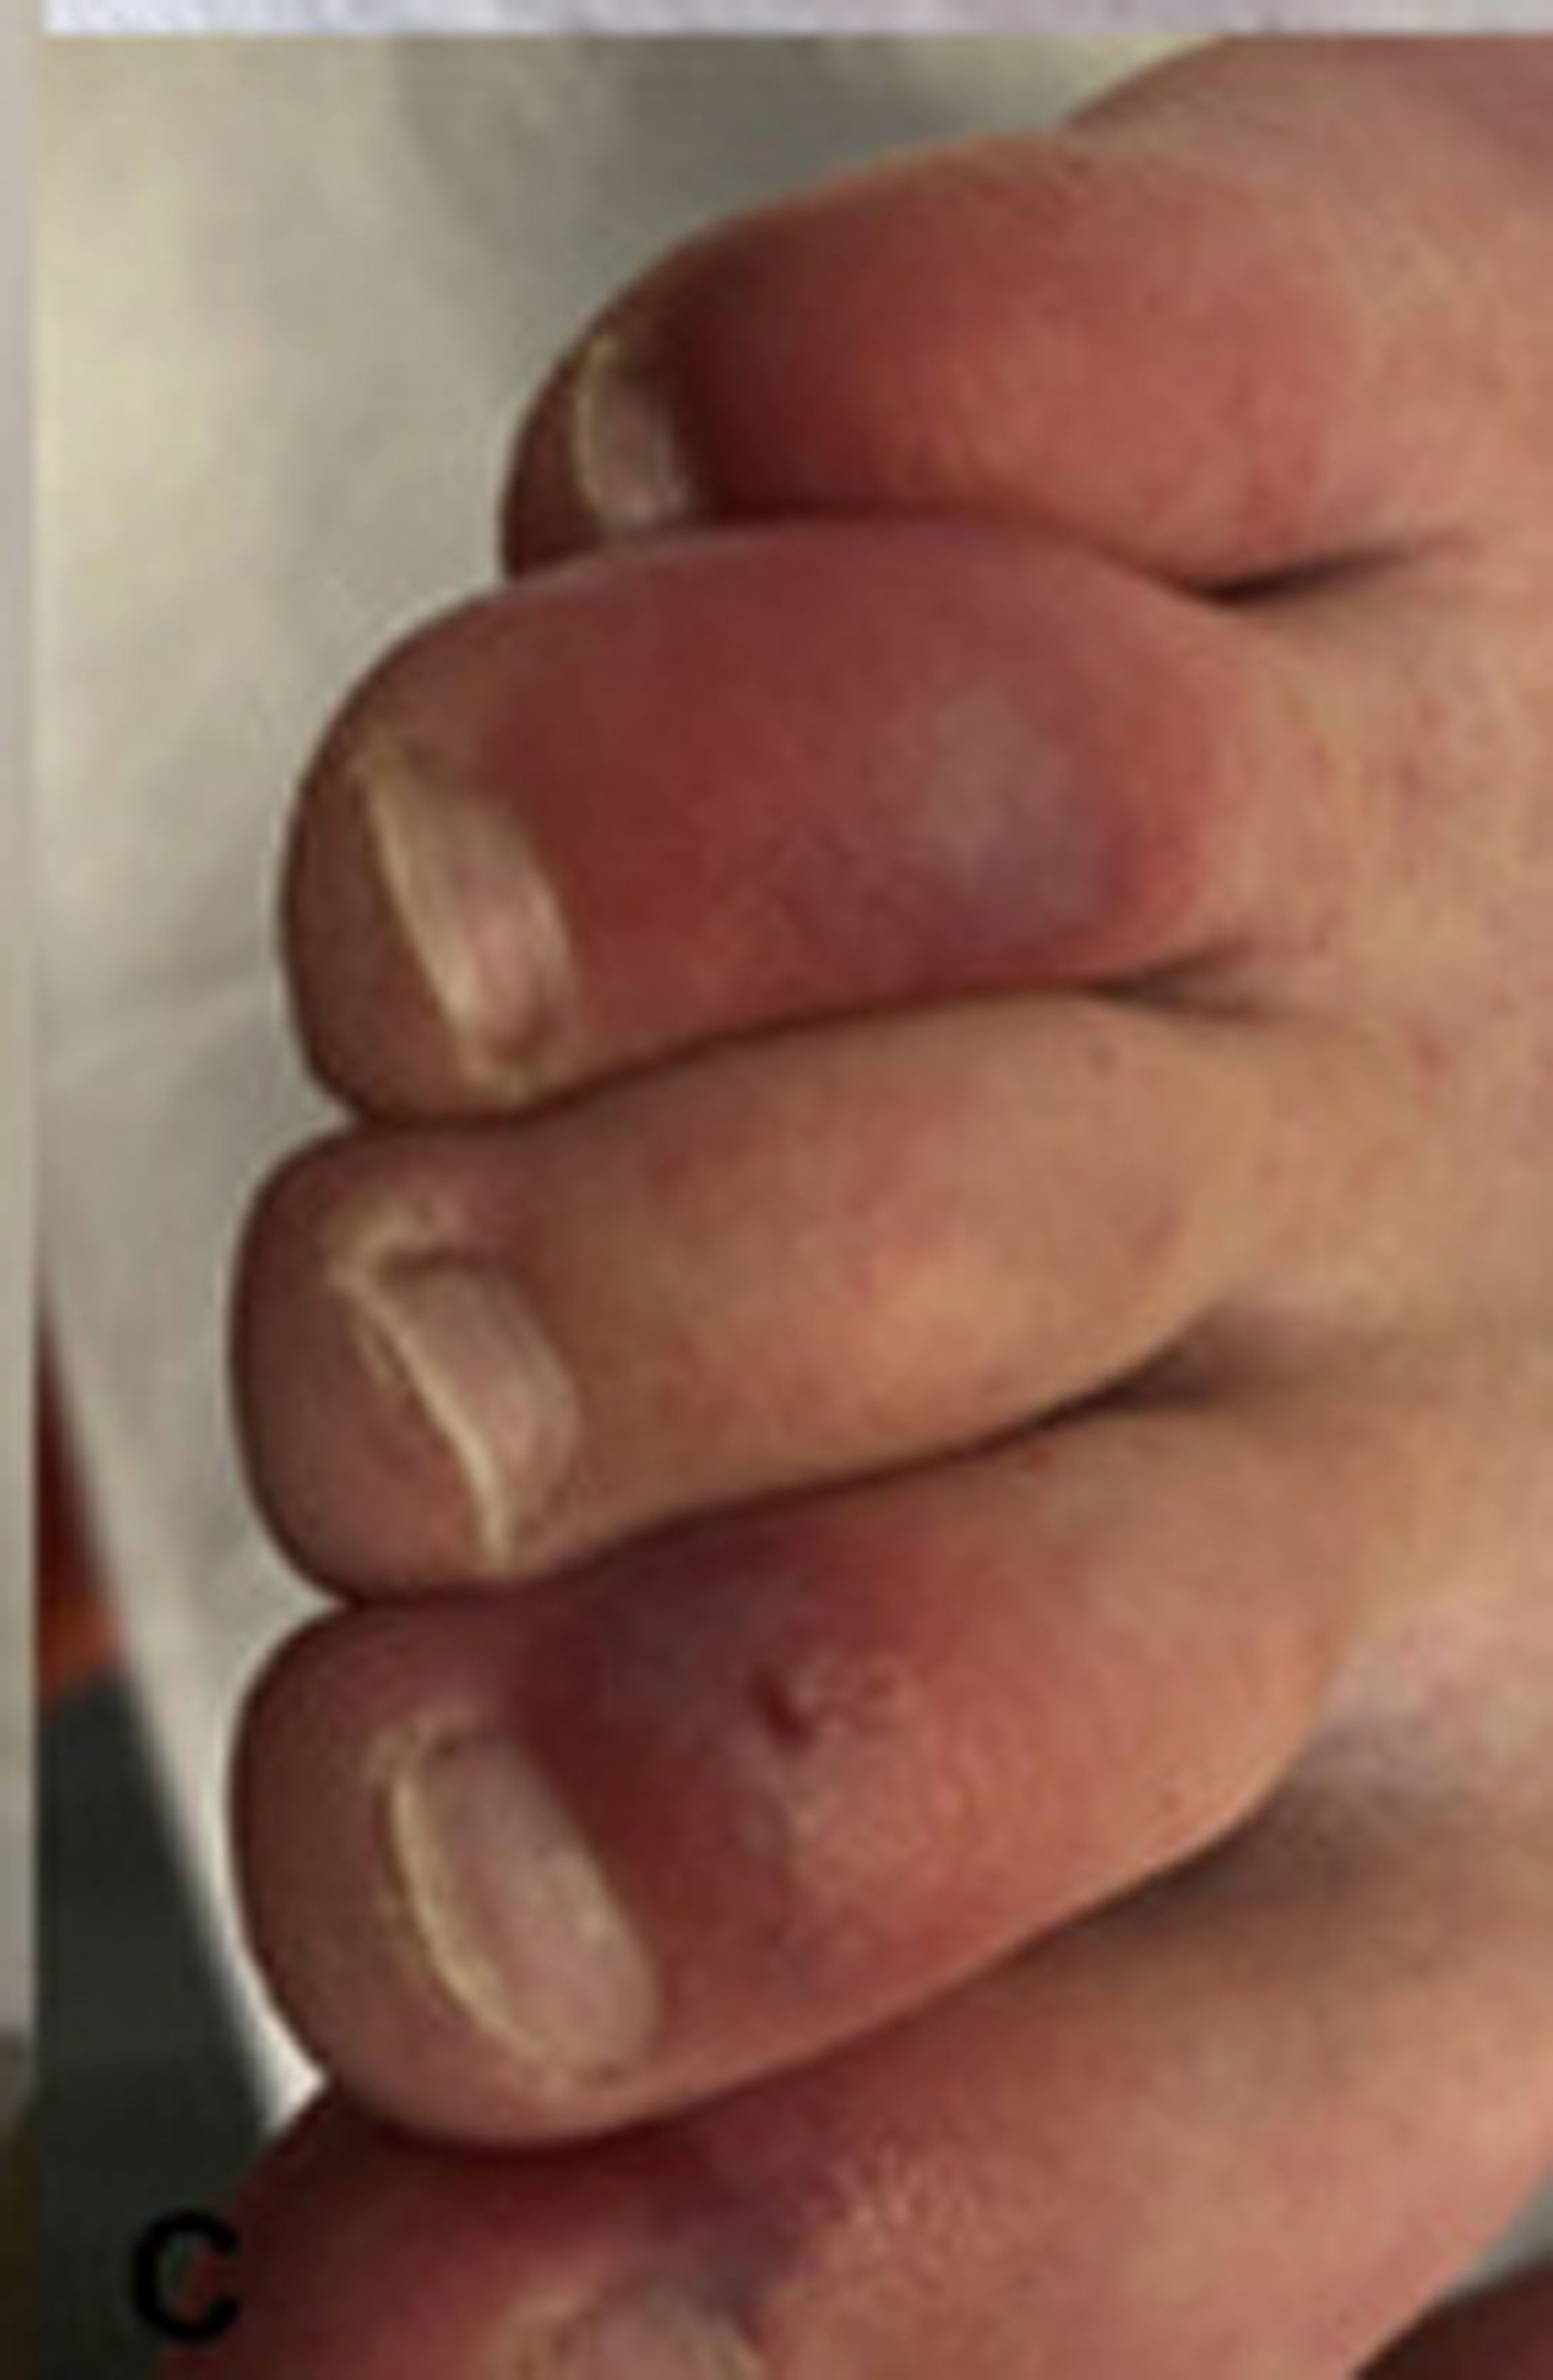 Covid-toe – swollen toes as a result of coronavirus